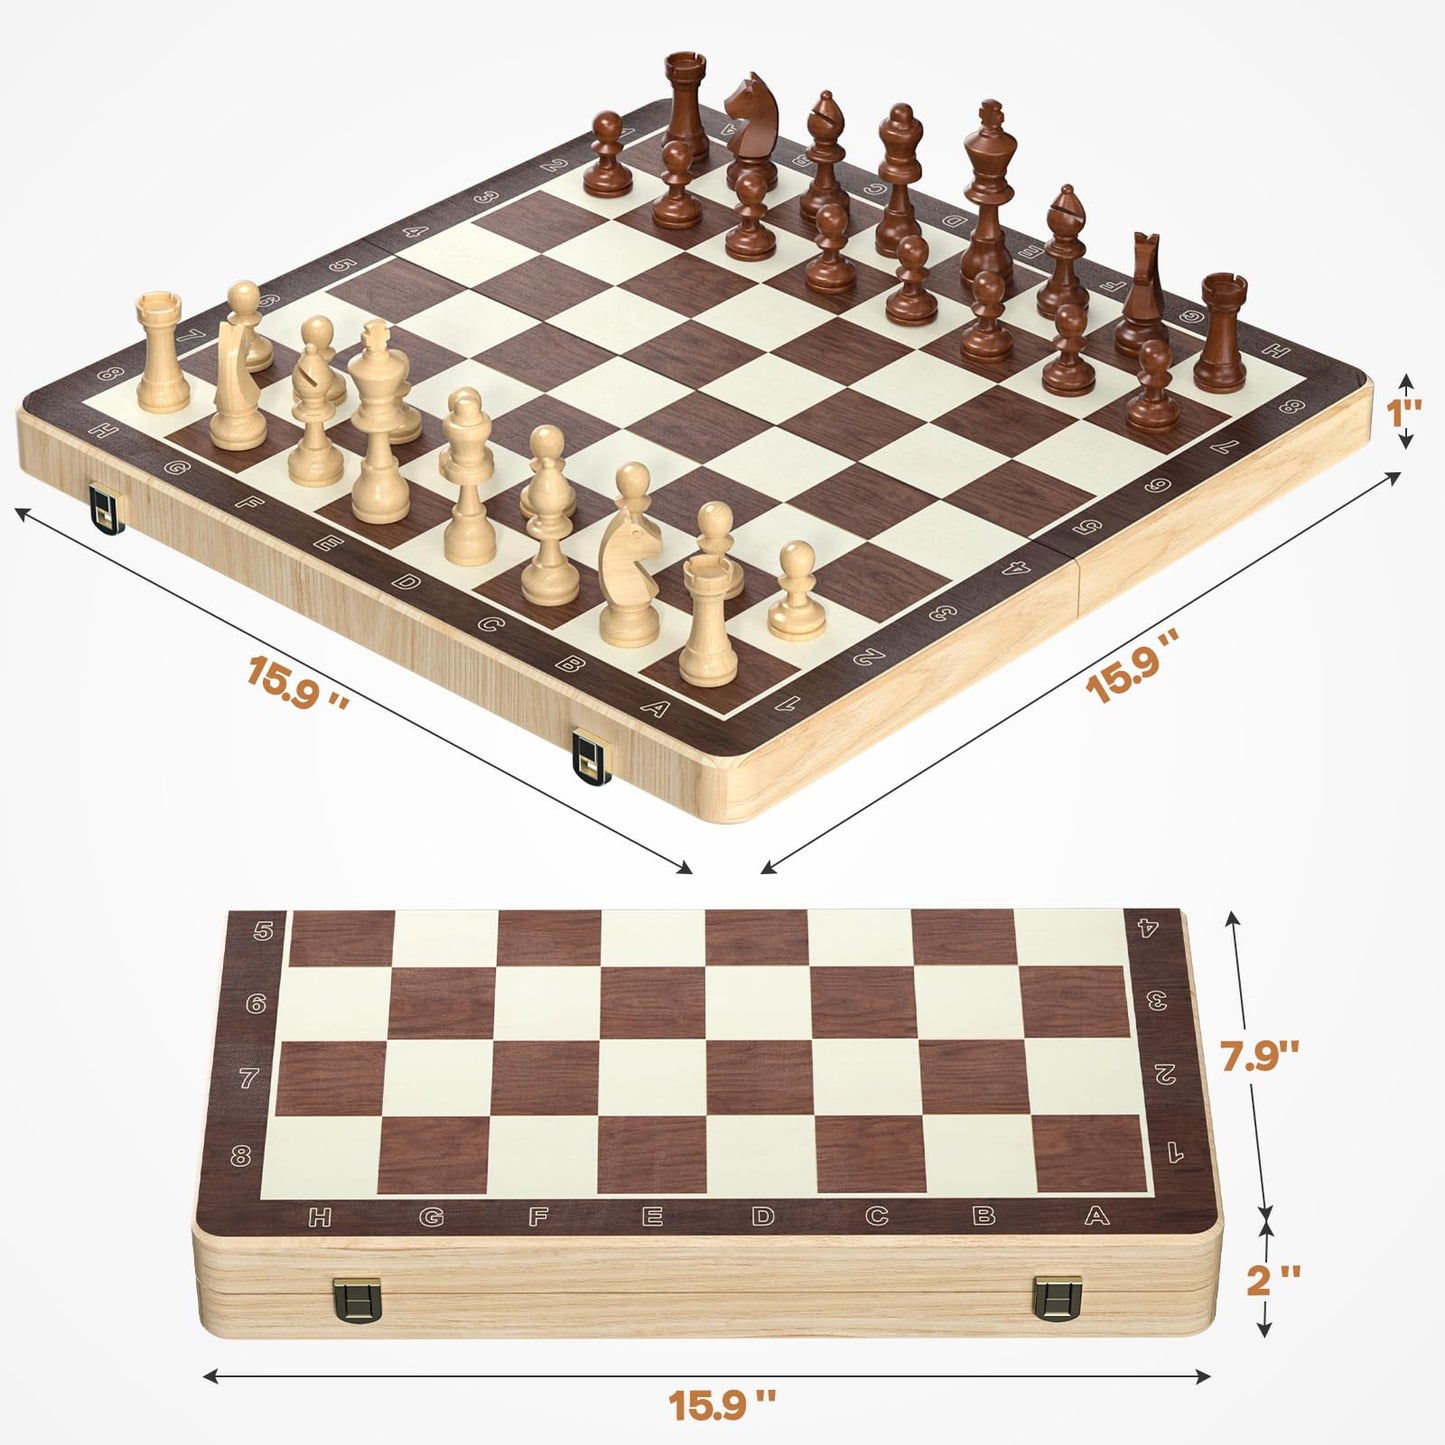 Magnetic Chess Set with Checkers - Meuzhen 16" Wooden Chess Board Game Travel Chess for Adults & Kids, Gift for Men Women, Chess Gift Toys for Boys Girls 4-8-12